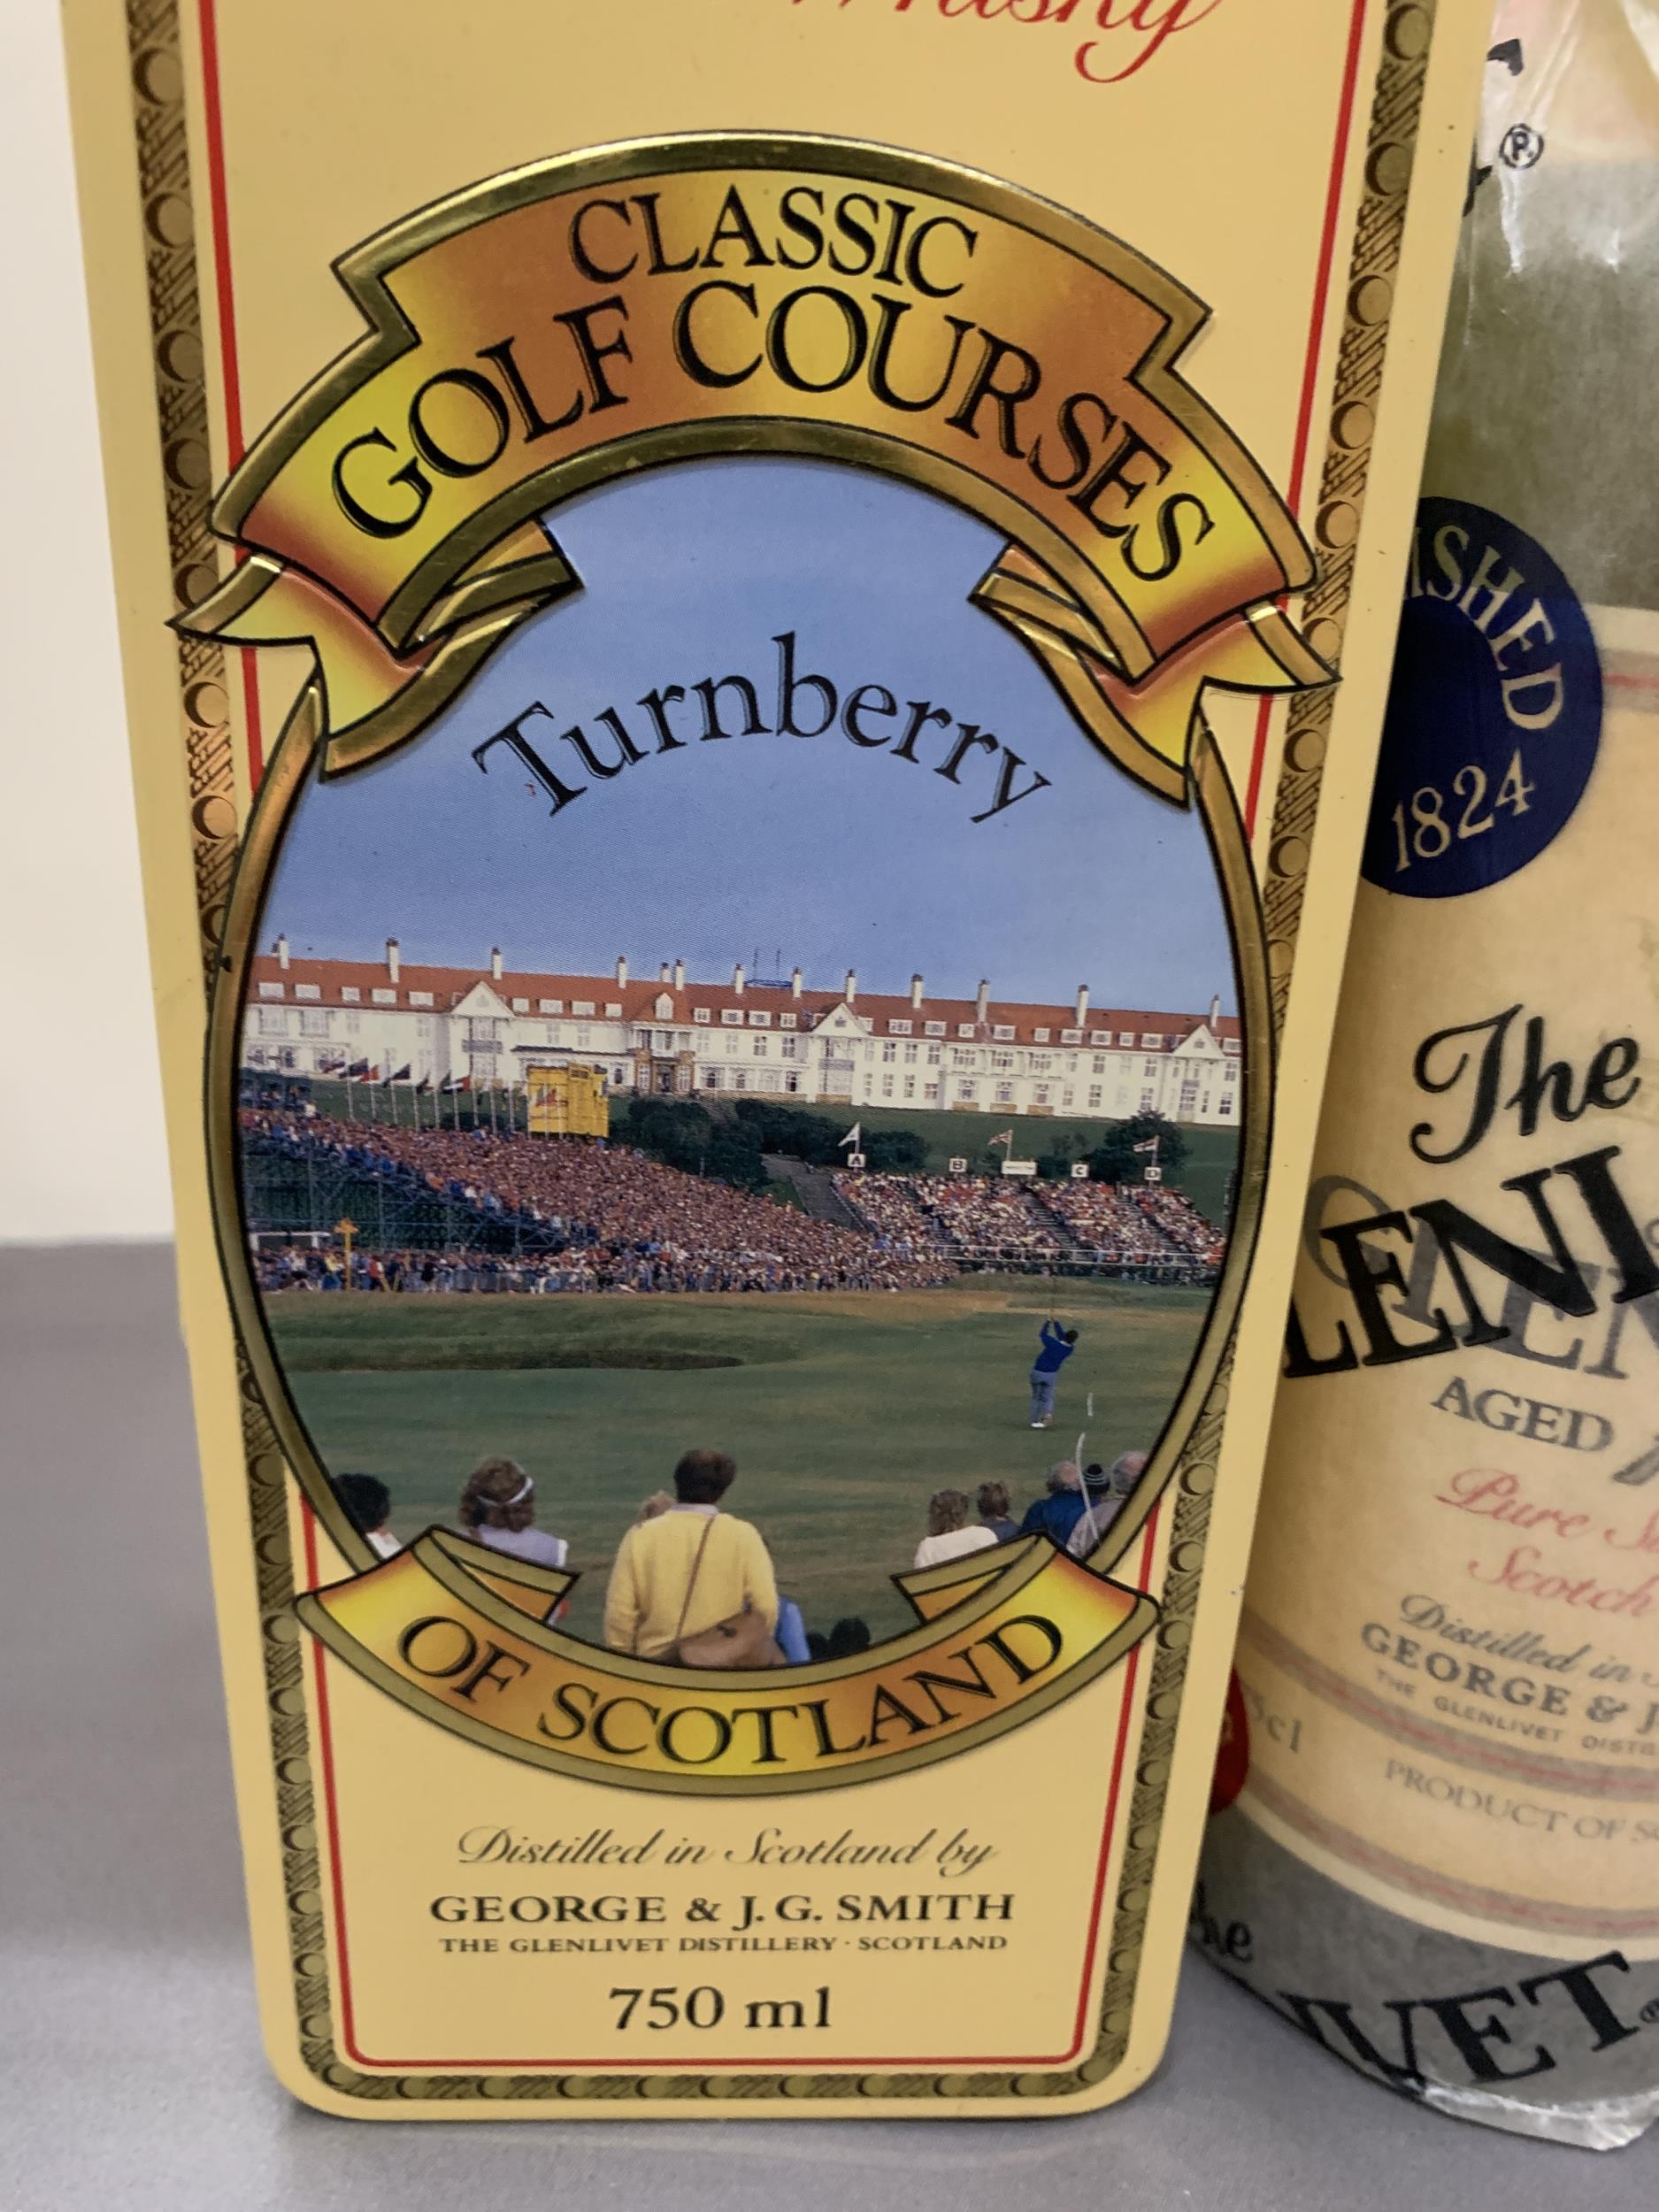 THE GLENLIVET AGED 12 YEARS CLASSIC GOLF COURSES OF SCOTLAND TUNBERRY, 750ML IN ORIGINAL WRAPPING - Image 2 of 5